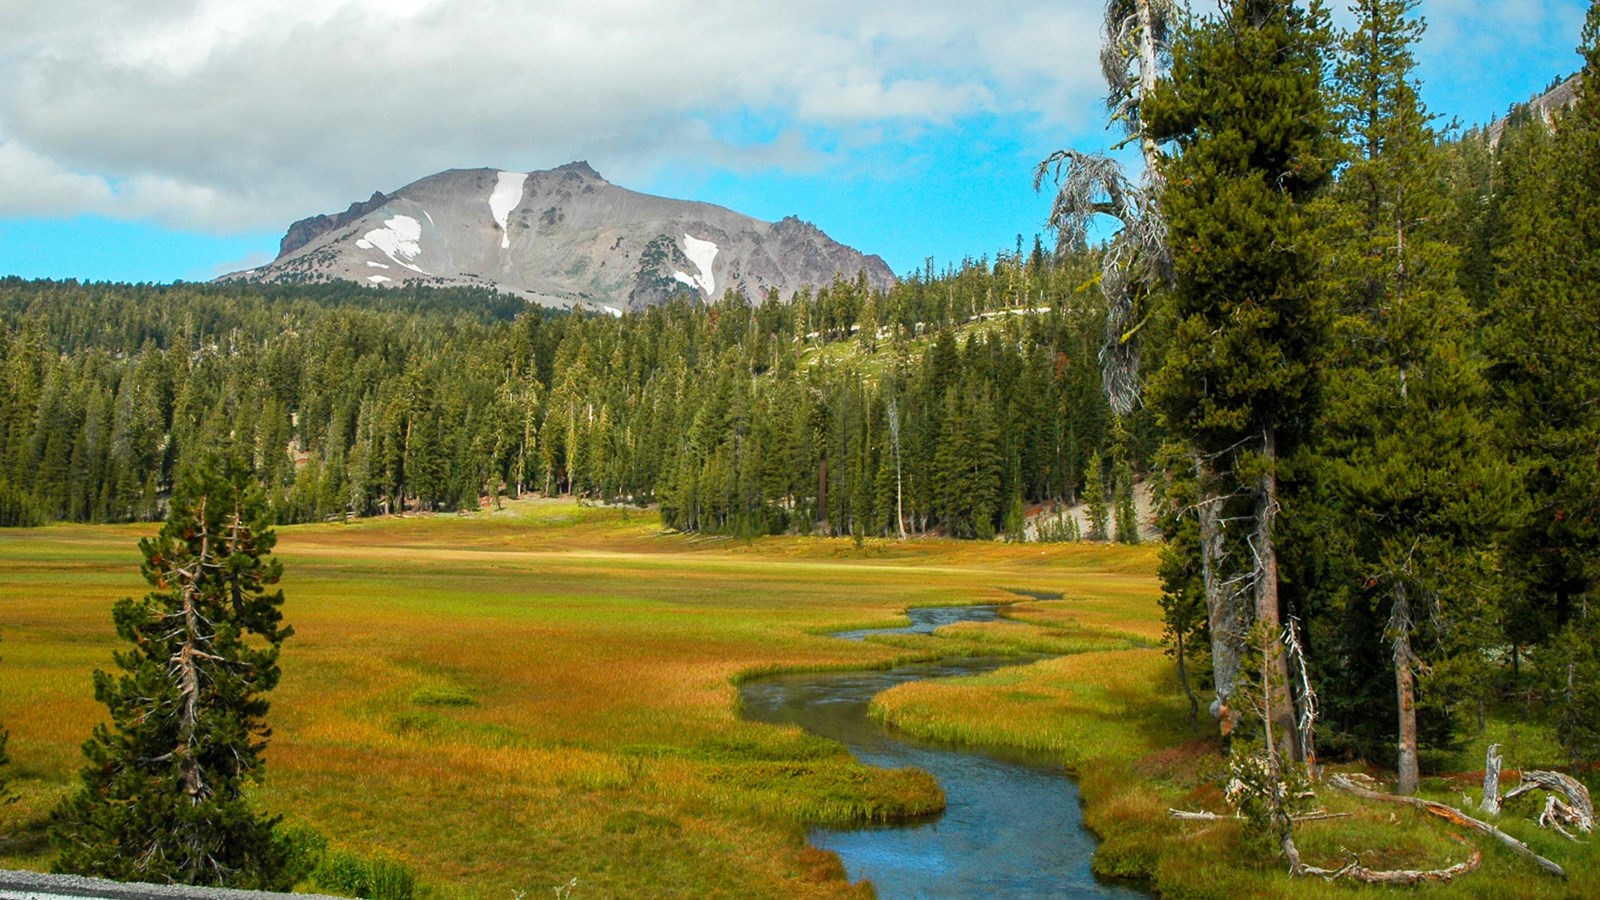 A photo of a creek winding through a mountain meadow at the base of a volcanic peak.